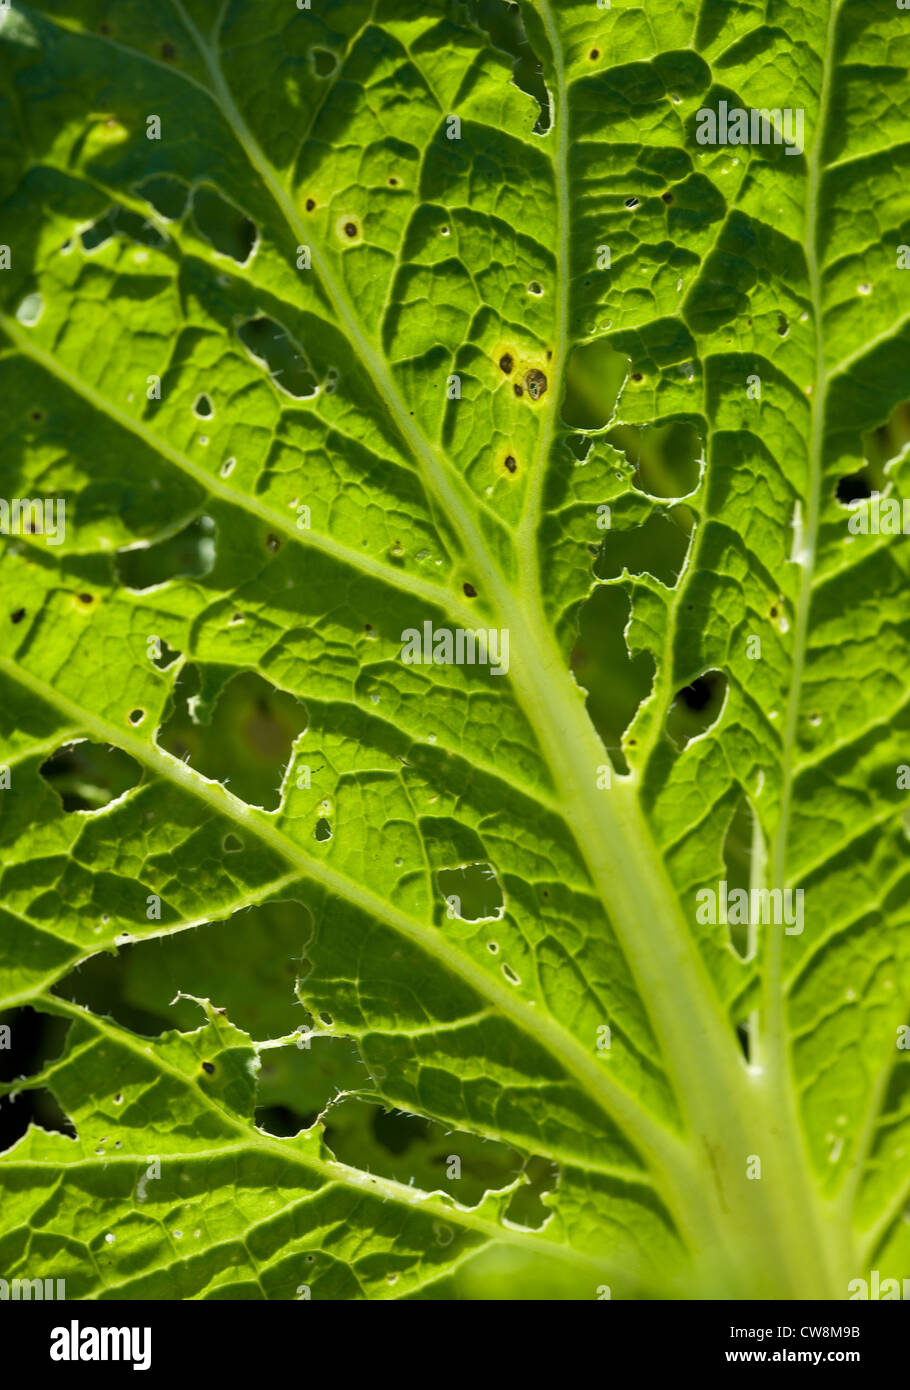 Berlin, Raupenfrass on a cabbage leaf Stock Photo